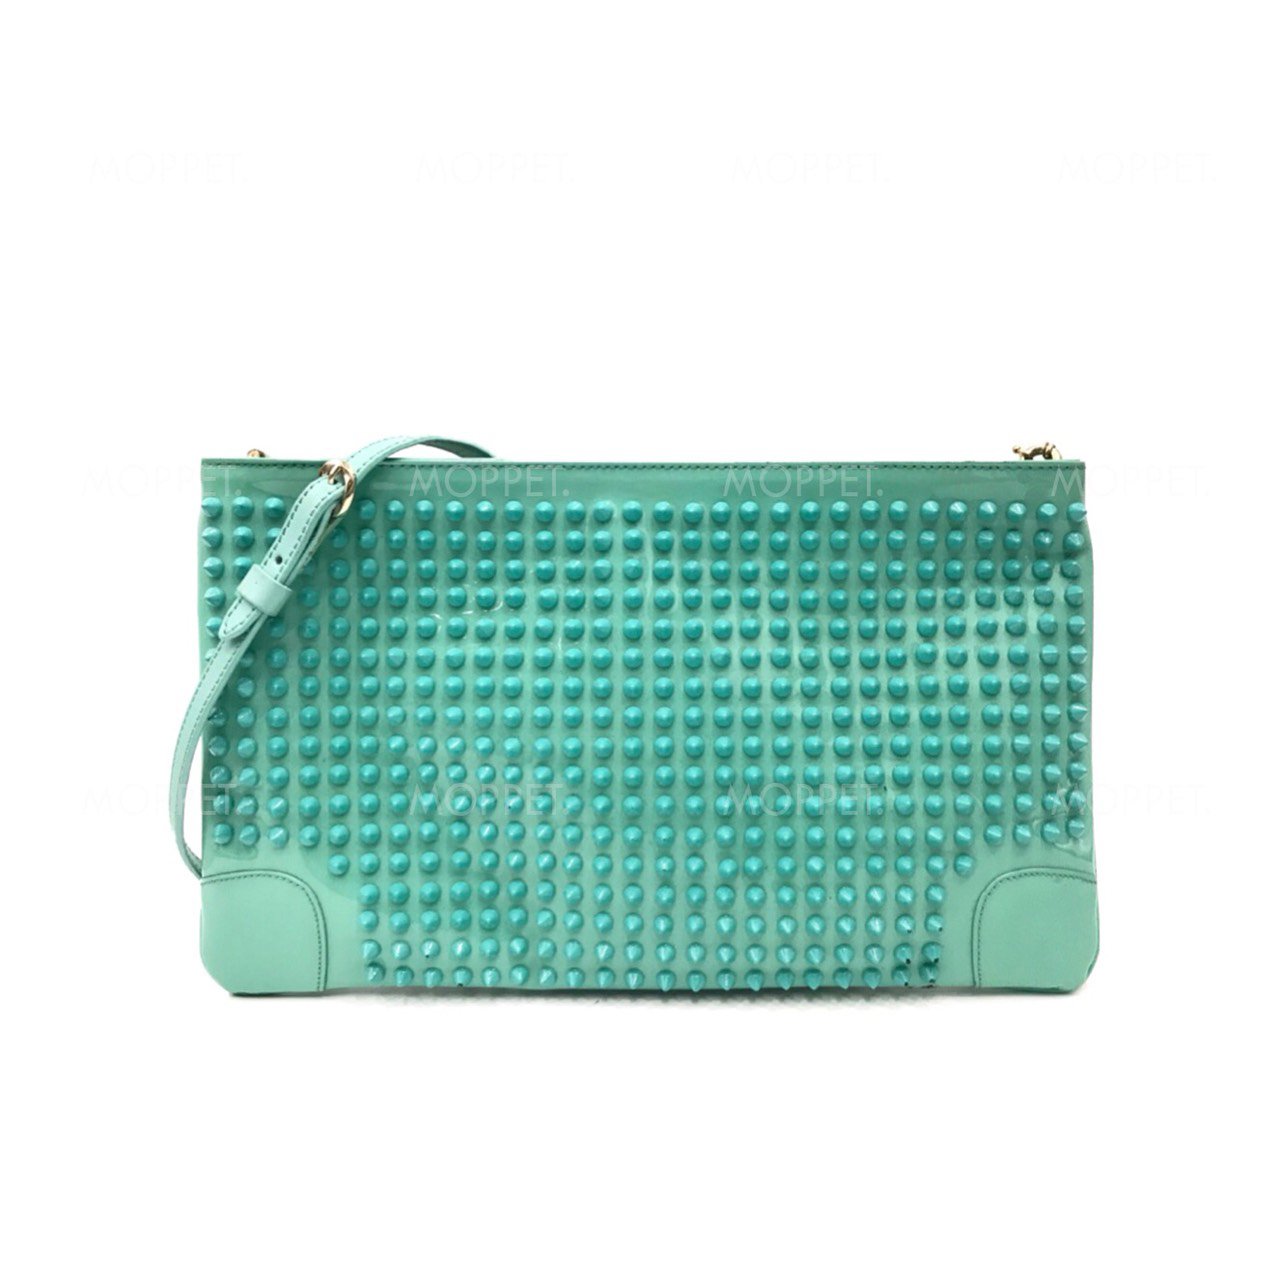 Used Christian Louboutin Clutch Bag in Turquoise Leather LGHW